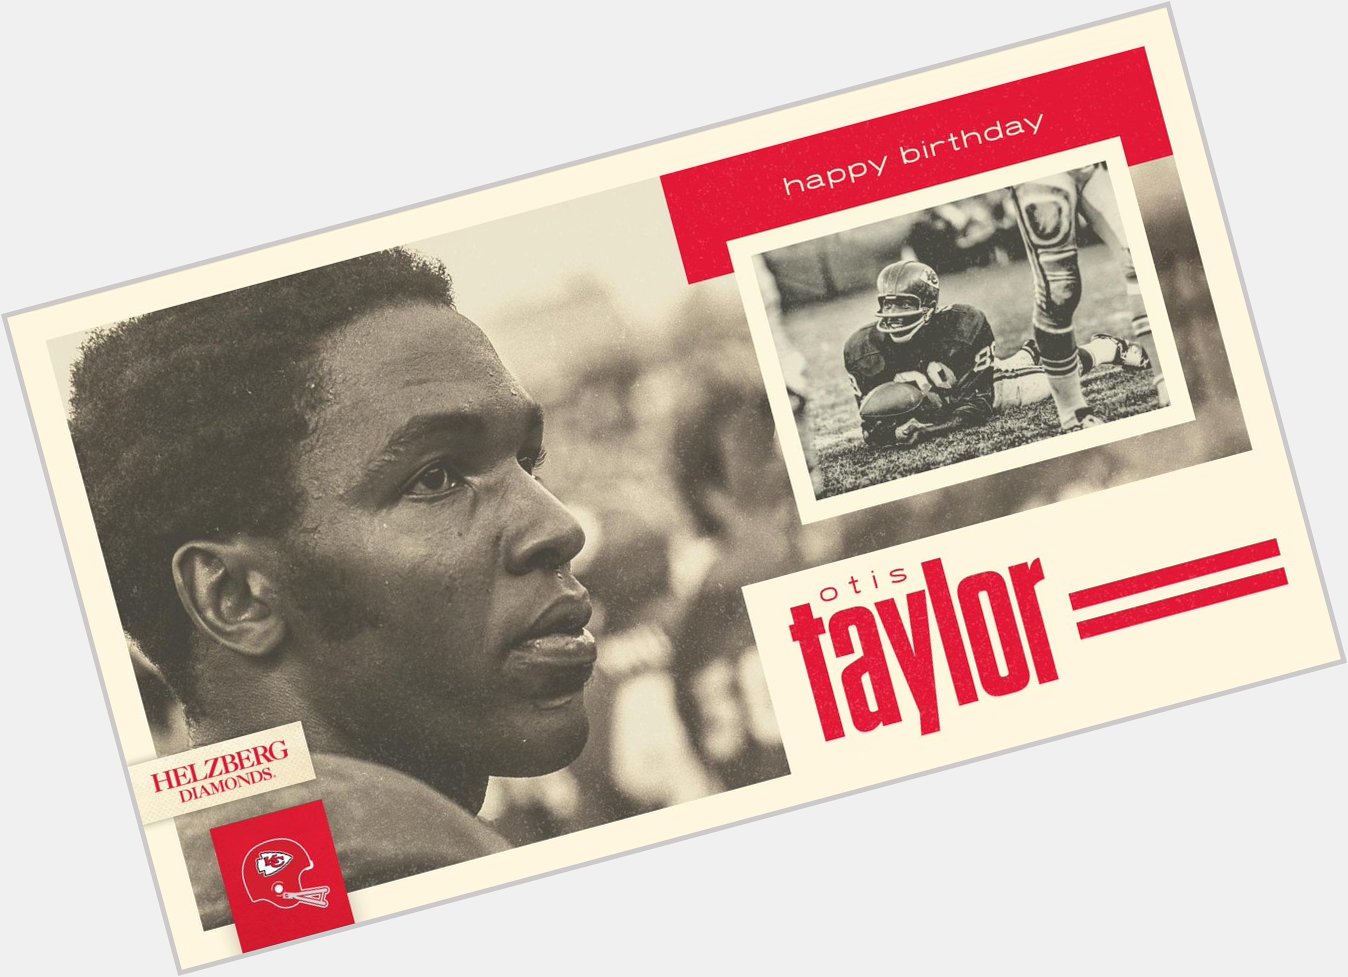 One of the greatest players to wear a Chiefs uniform!

Happy birthday, Otis Taylor! 